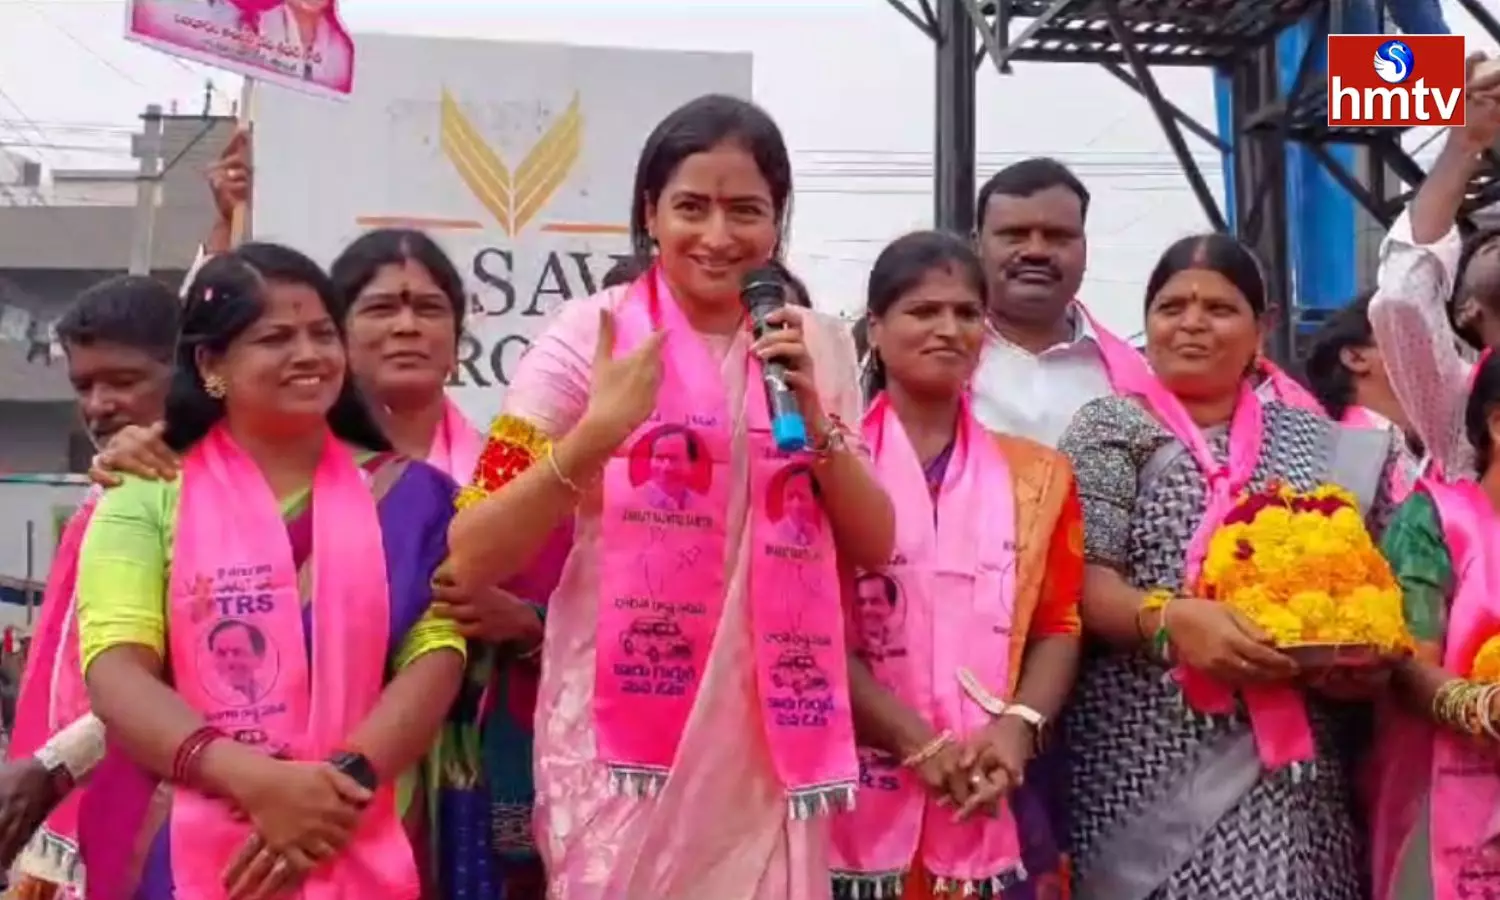 Minister Malla Reddy Daughter In Law Pothireddy Who Danced With The Women